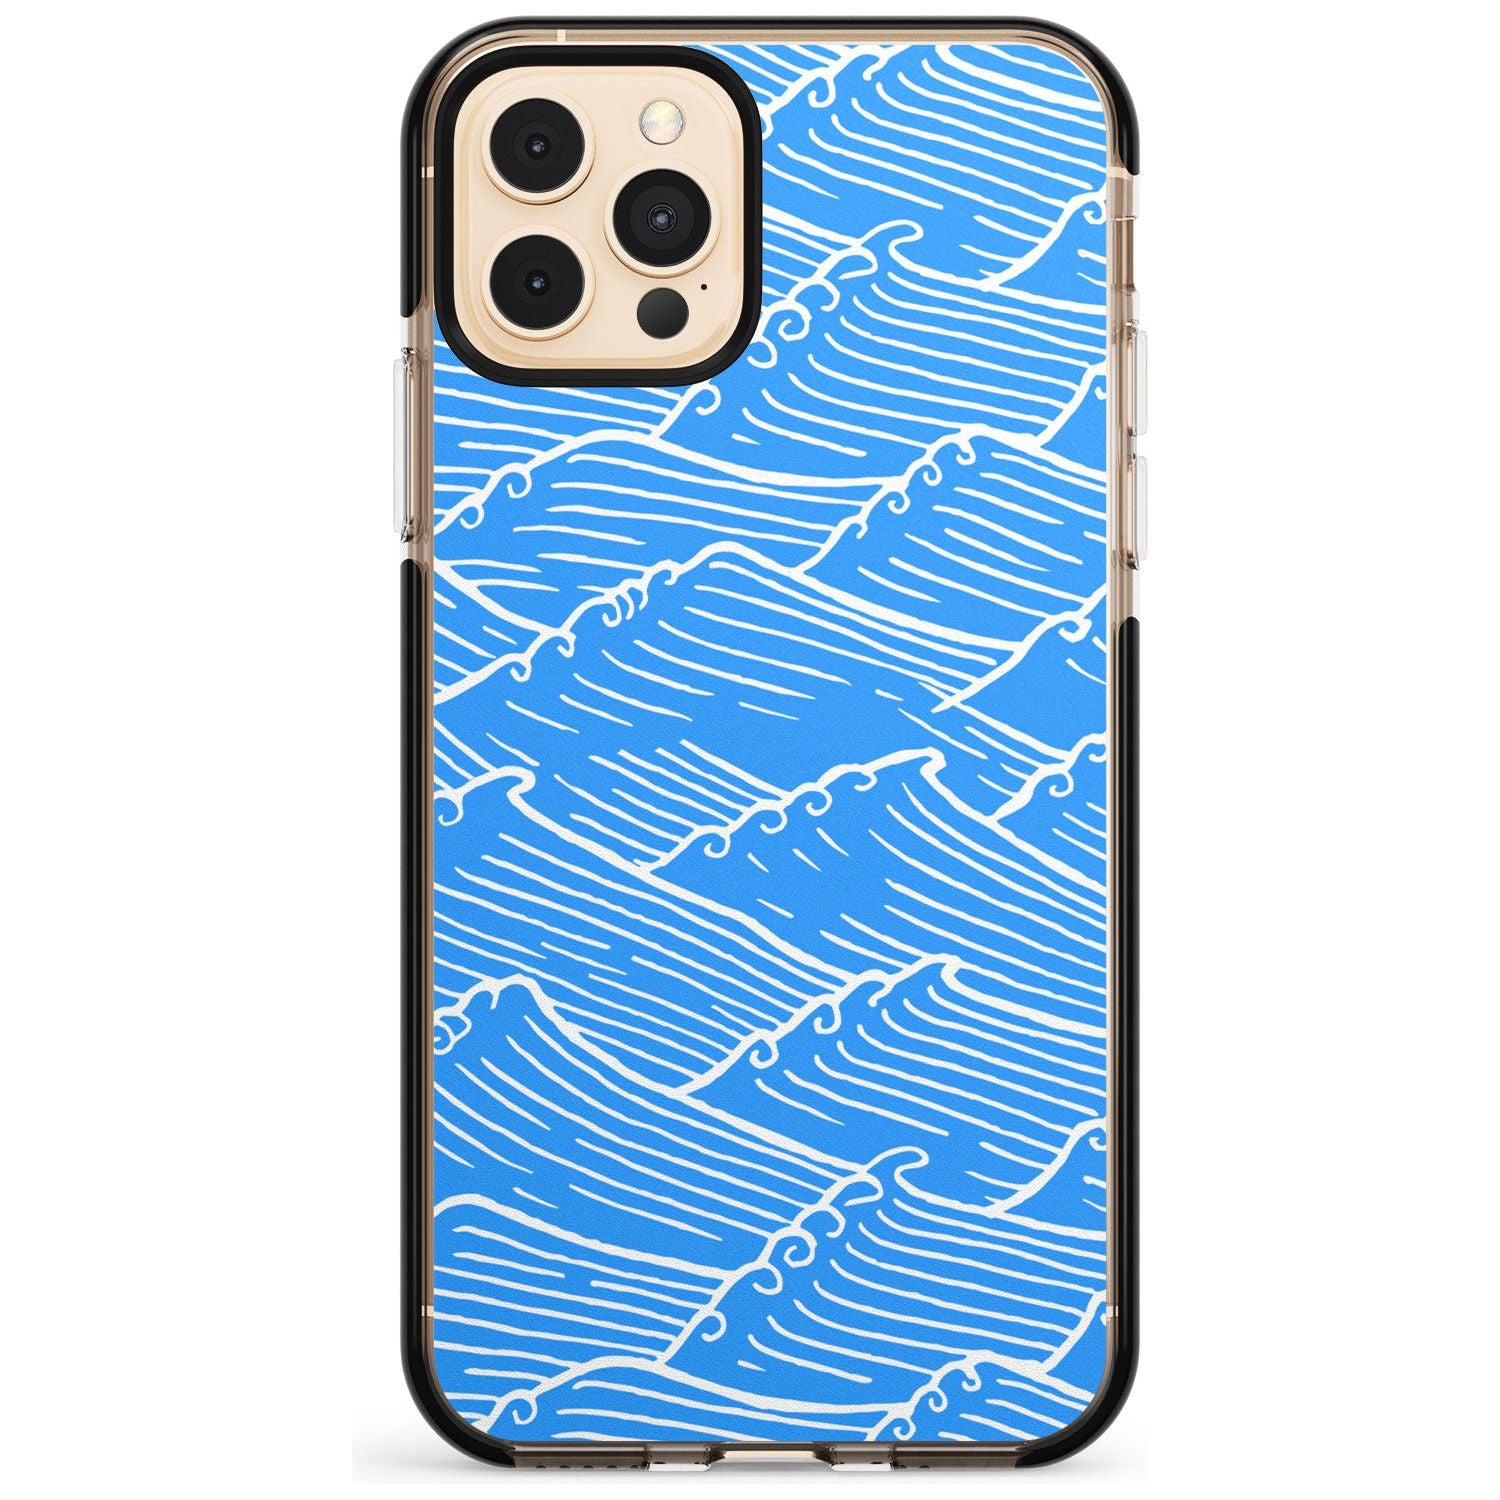 Waves Pattern Black Impact Phone Case for iPhone 11